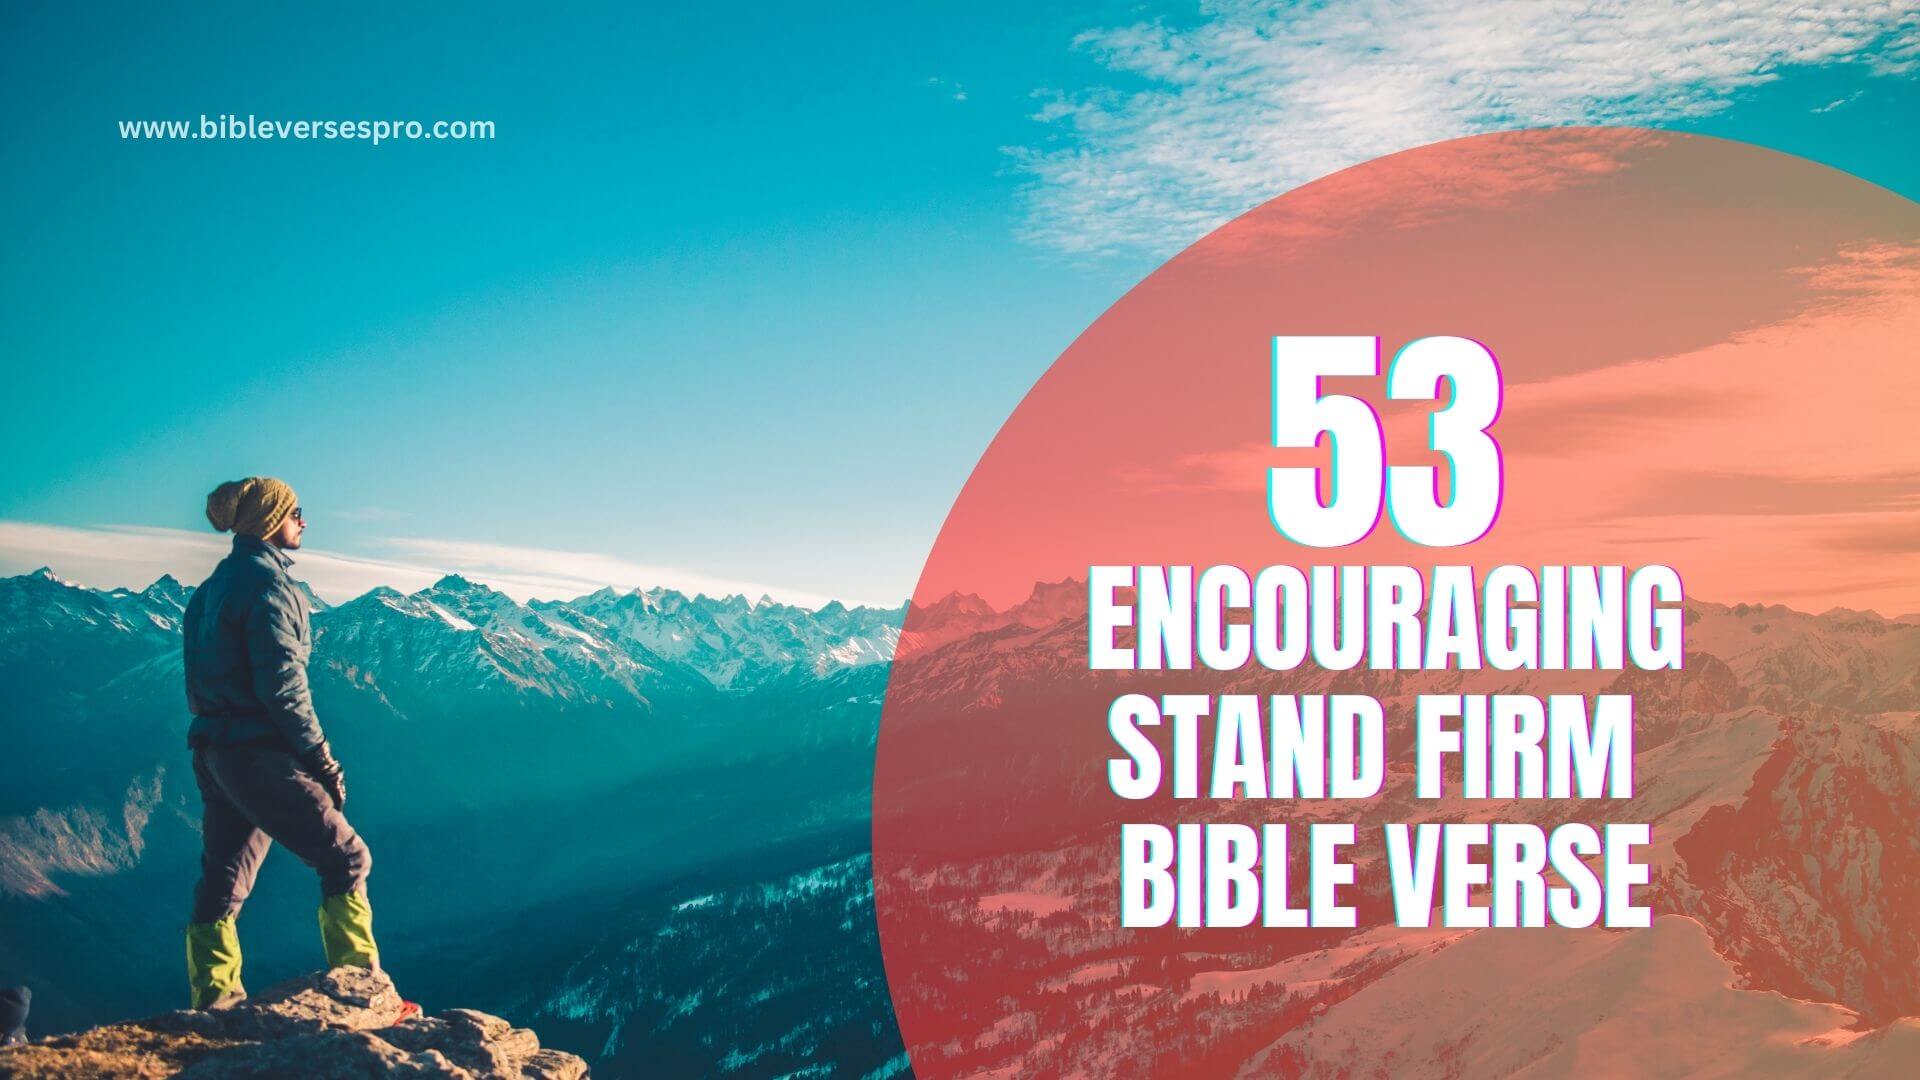 ENCOURAGING STAND FIRM BIBLE VERSE (1)